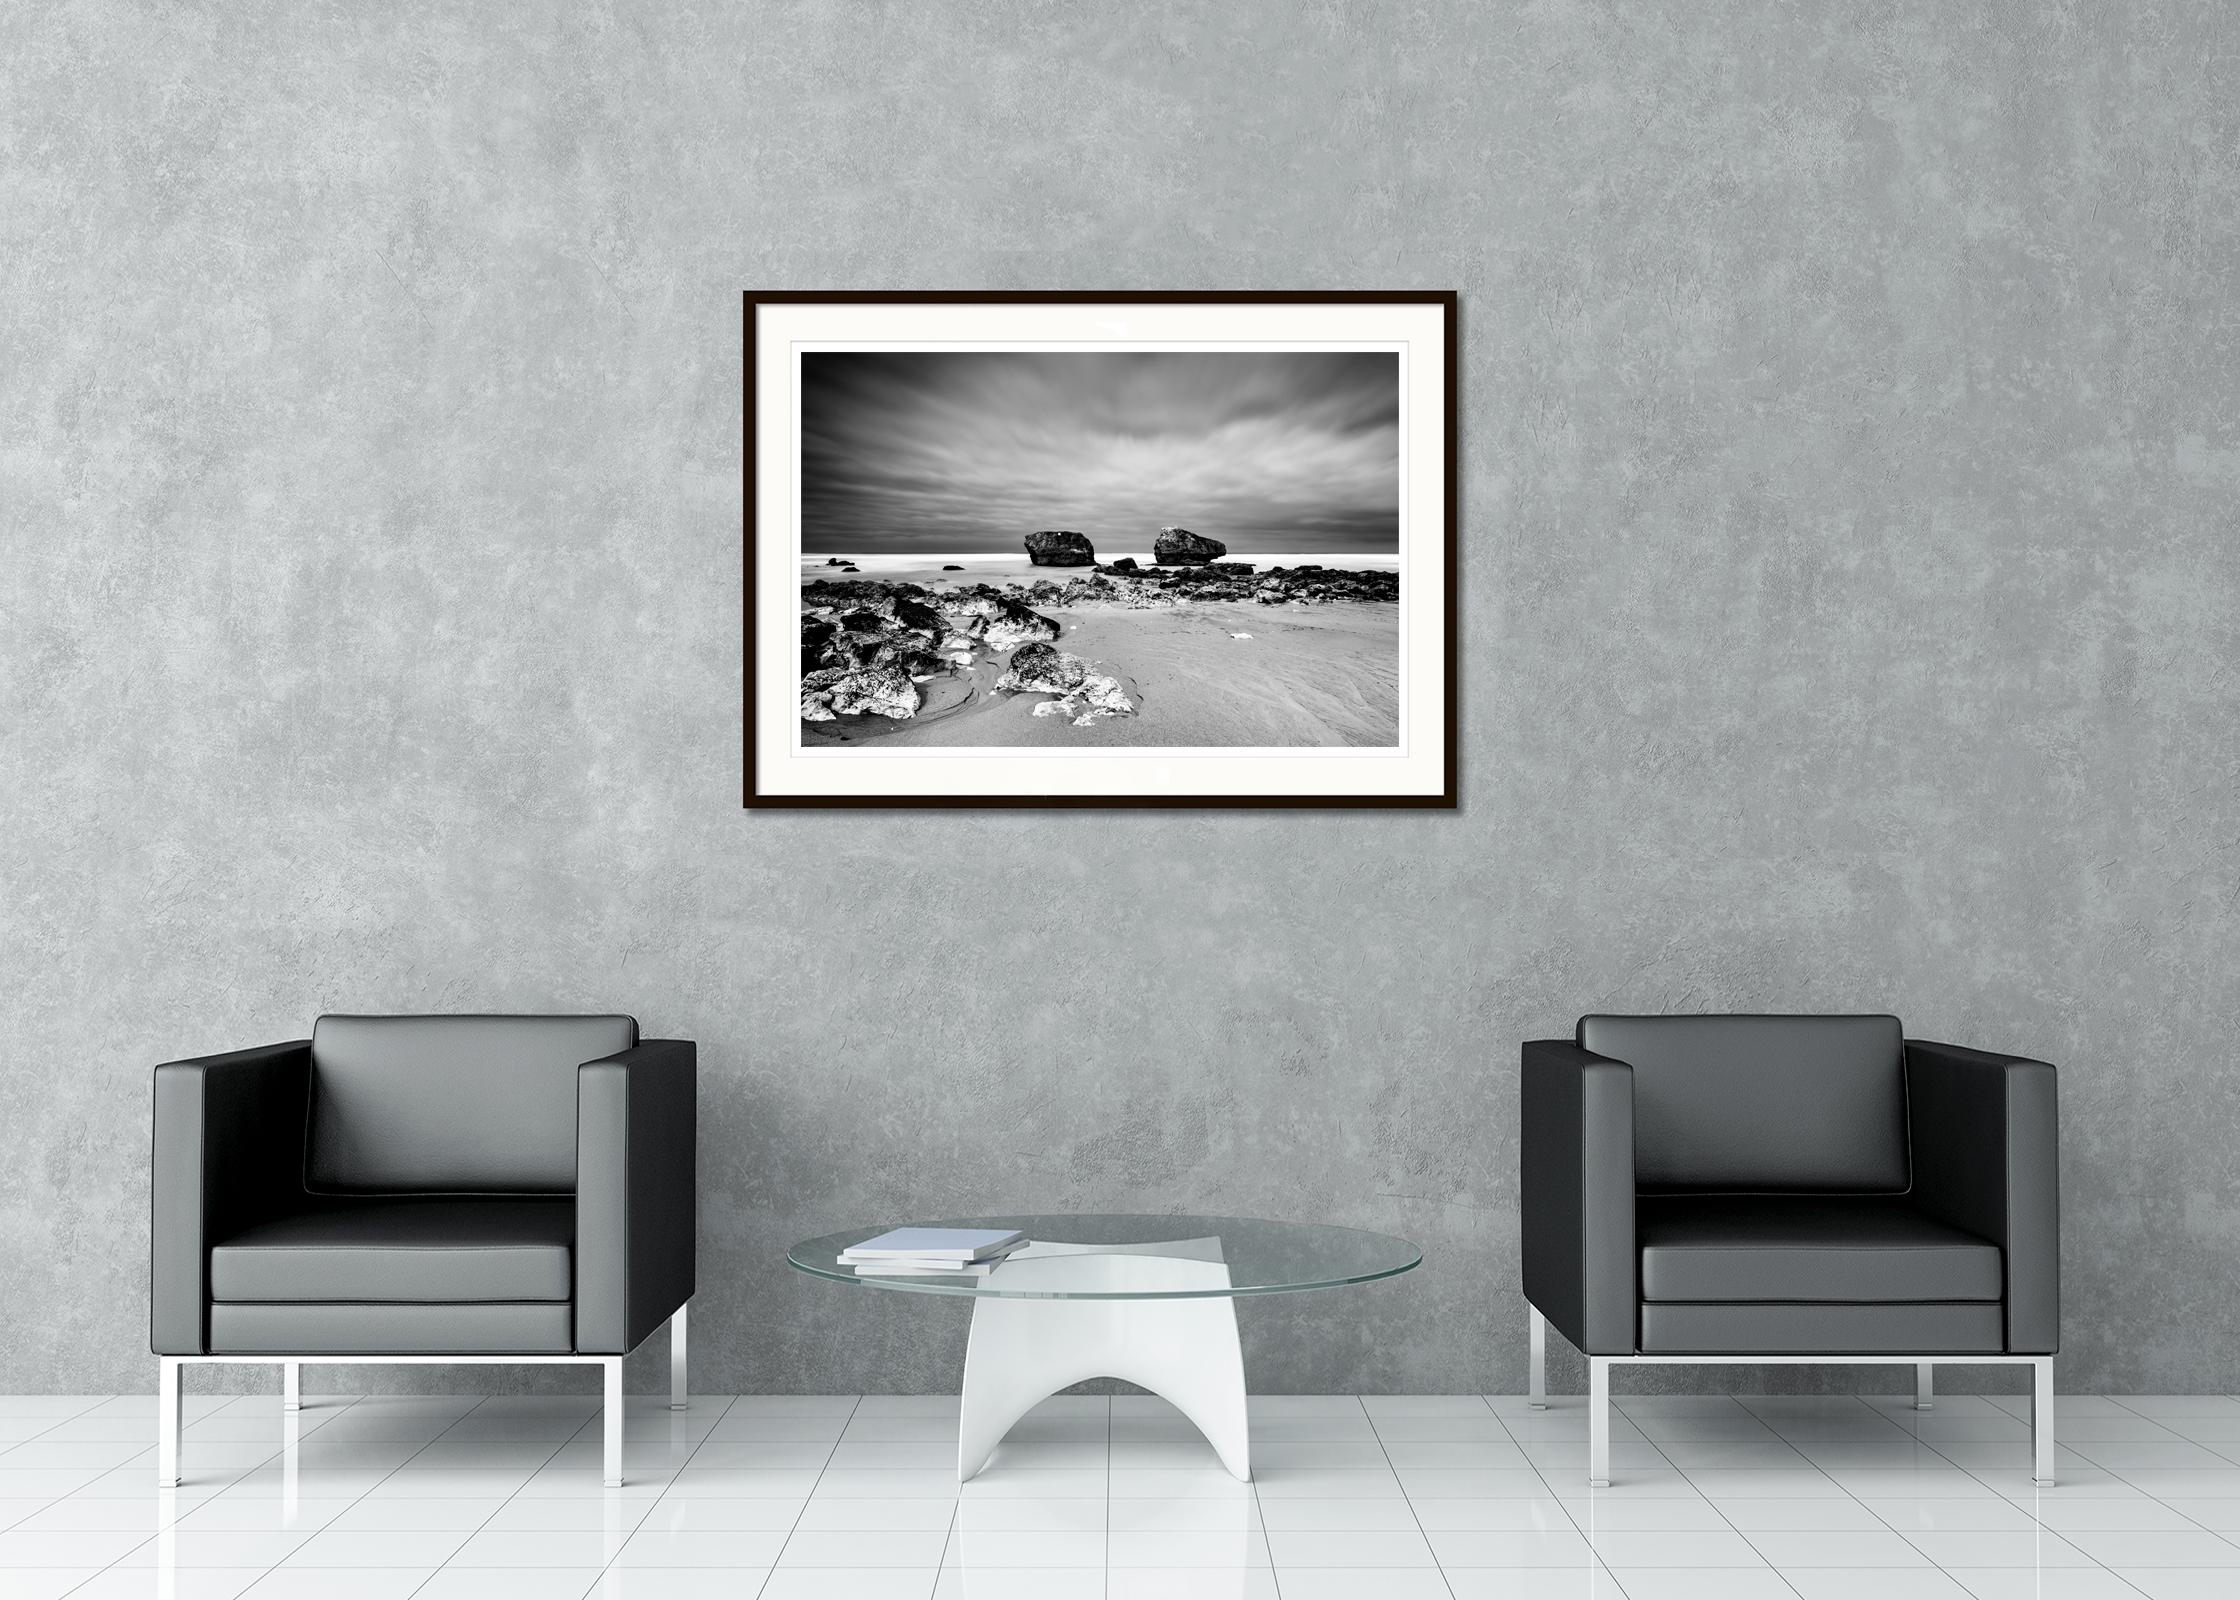 Black and white fine art panorama waterscape - landscape photography. Giant rocks on the sandy beach of the Atlantic coast in France. Archival pigment ink print, edition of 8. Signed, titled, dated and numbered by artist. Certificate of authenticity